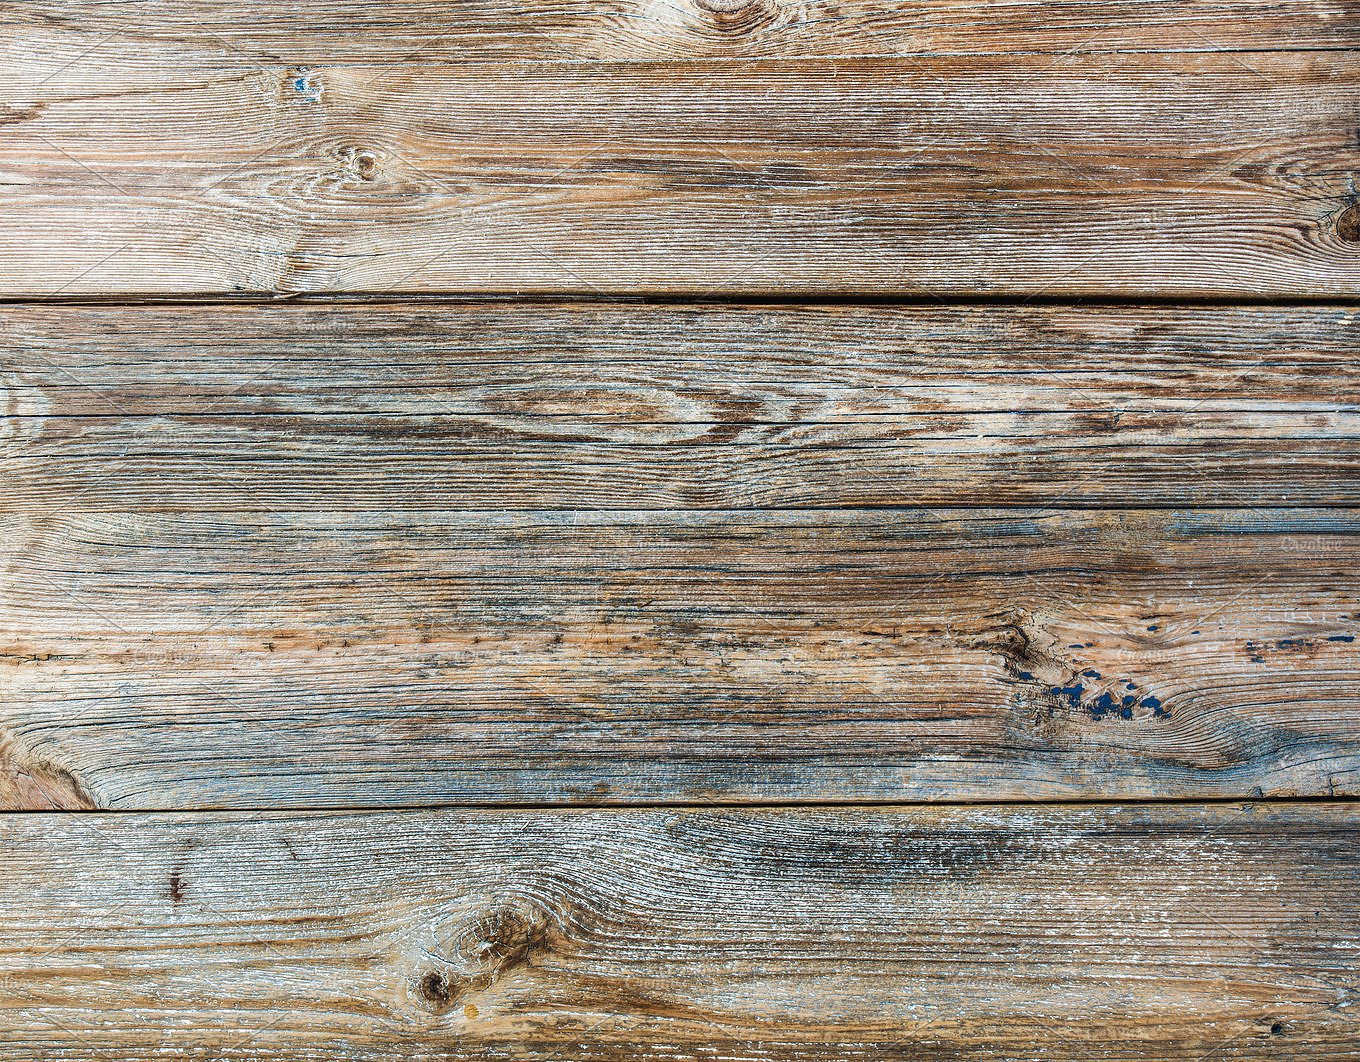 Old rustic faded wooden textur